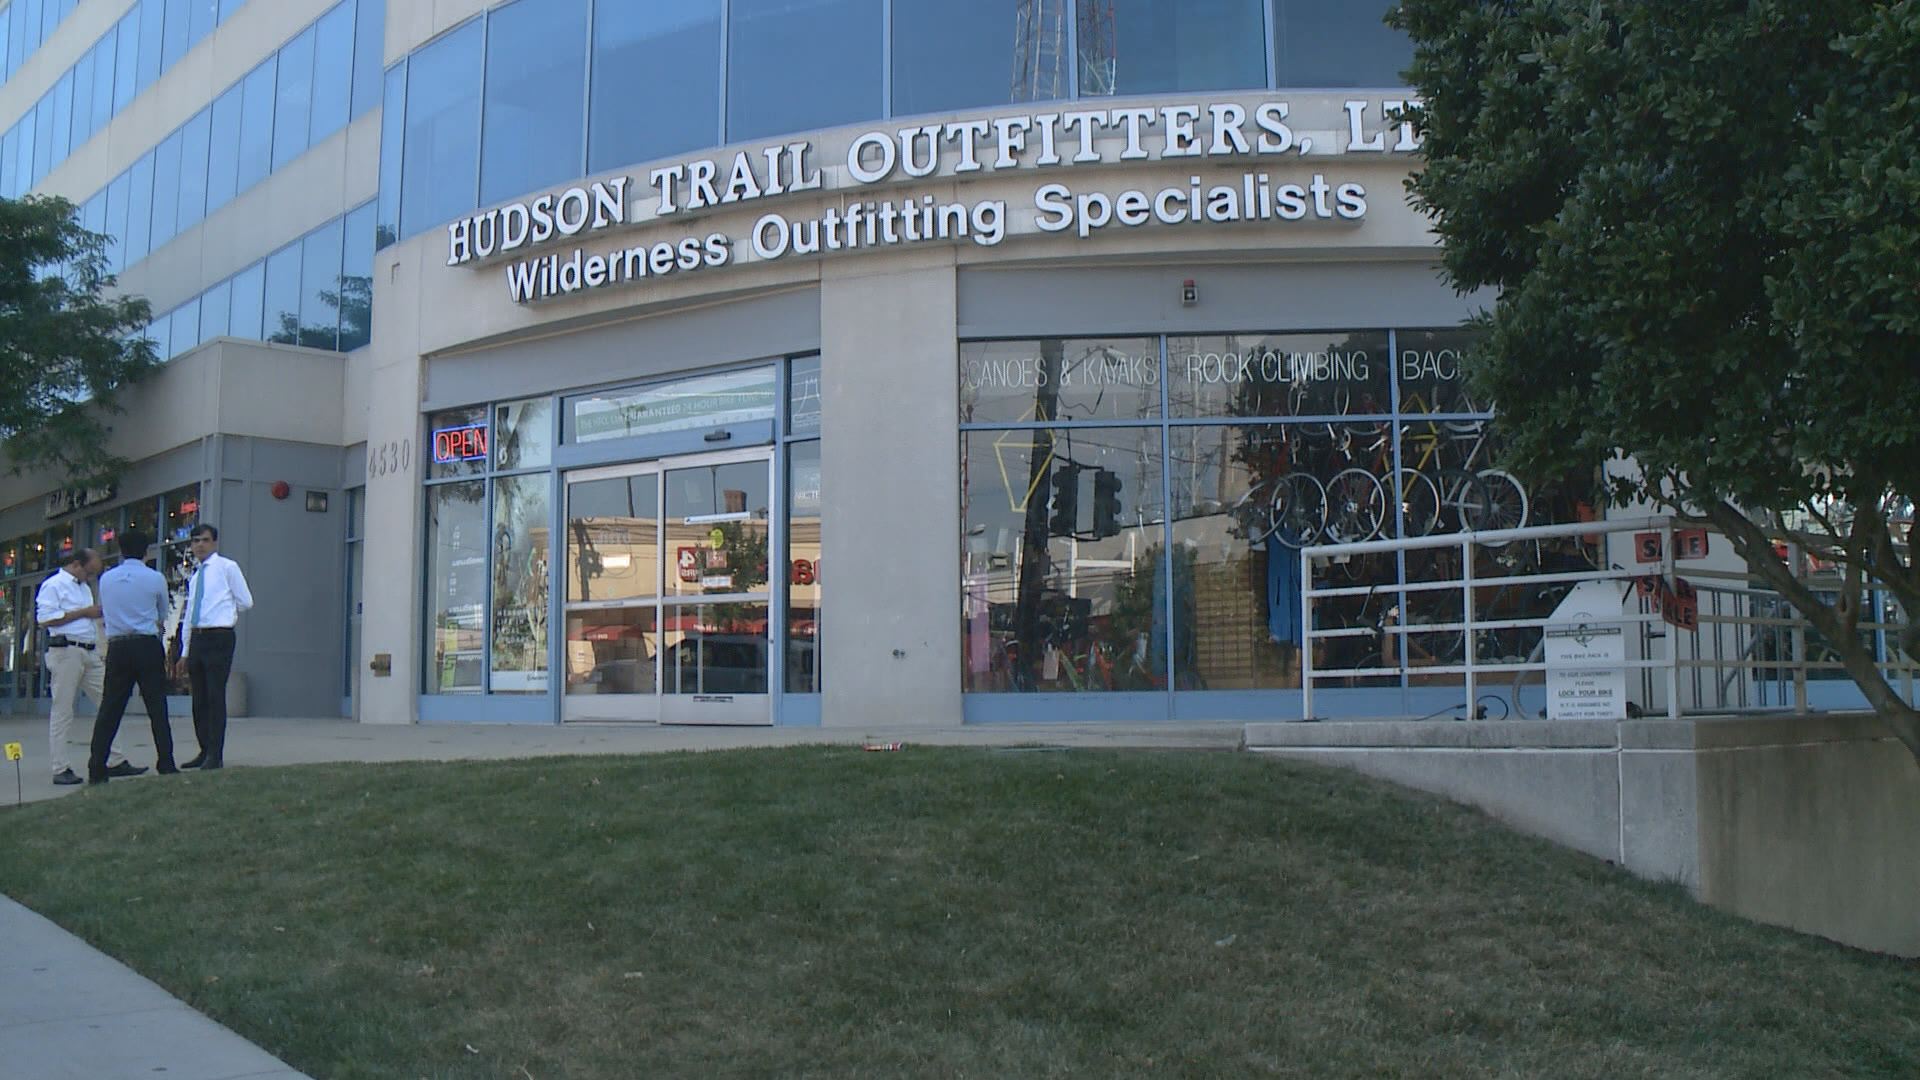 Hudson Trail Outfitters Is Going Out of Business